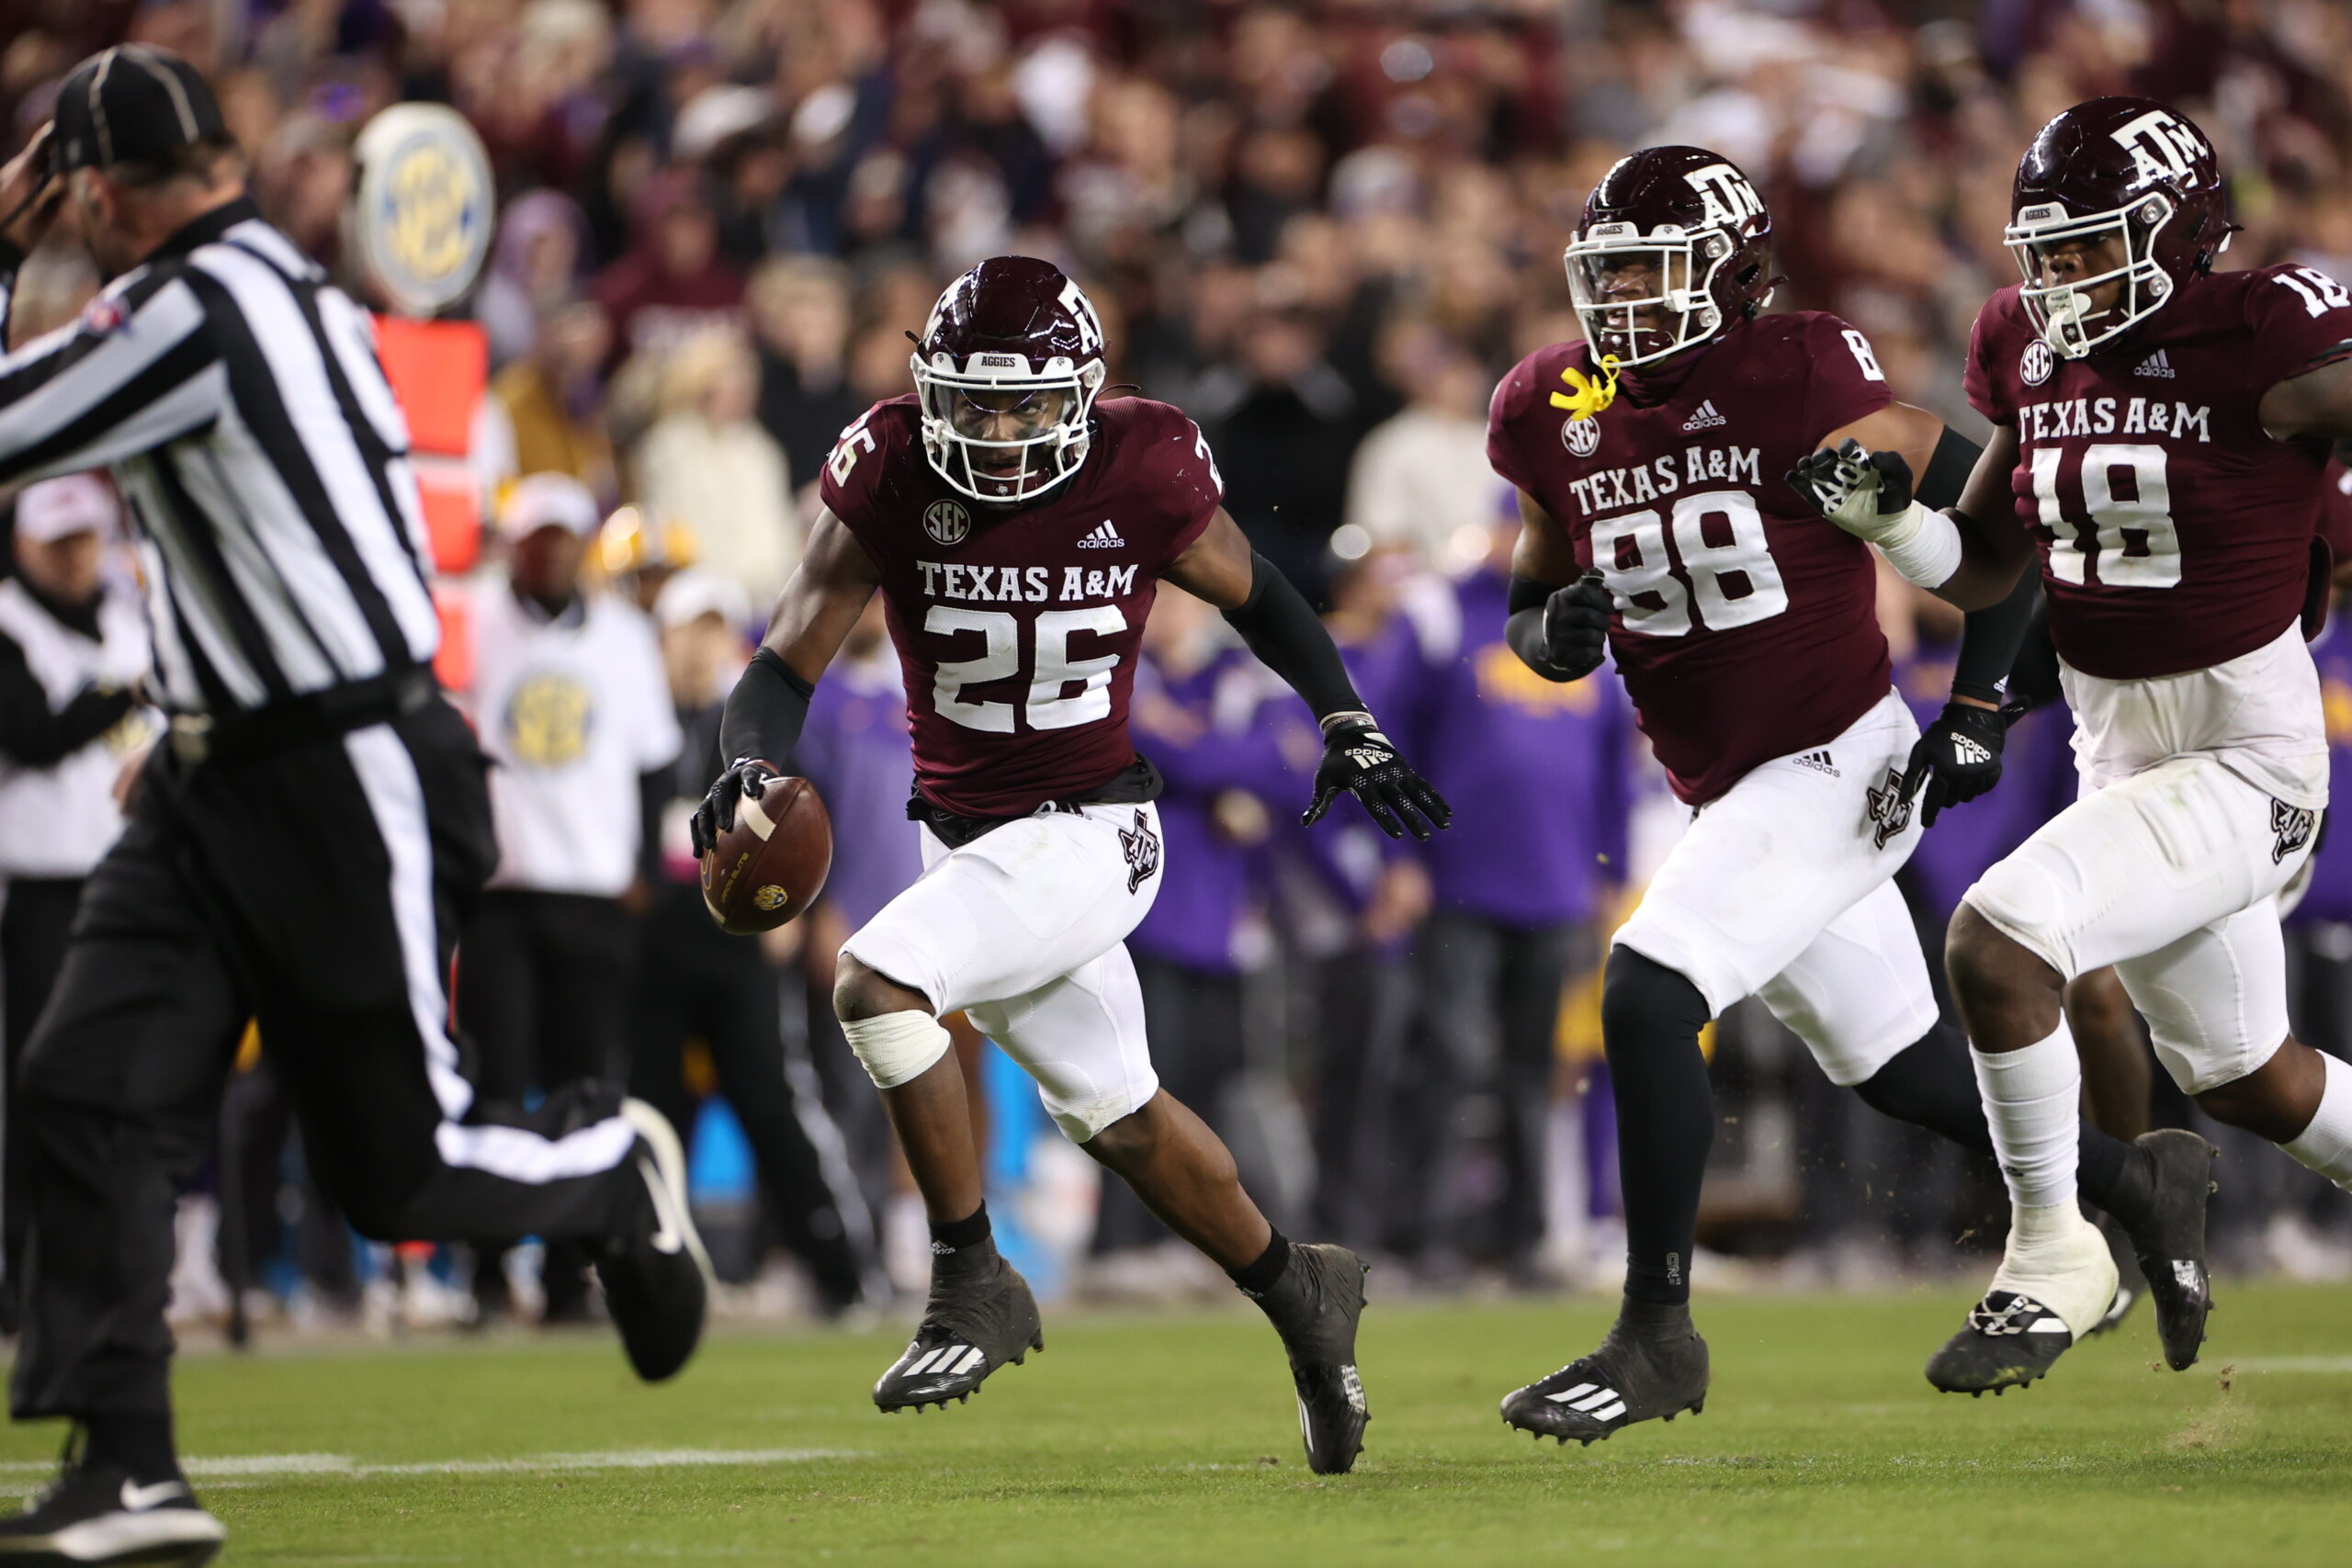 Texas A&M Upsets #5 LSU 38-23 And Puts A Dagger In The Tigers’ Playoff Hopes